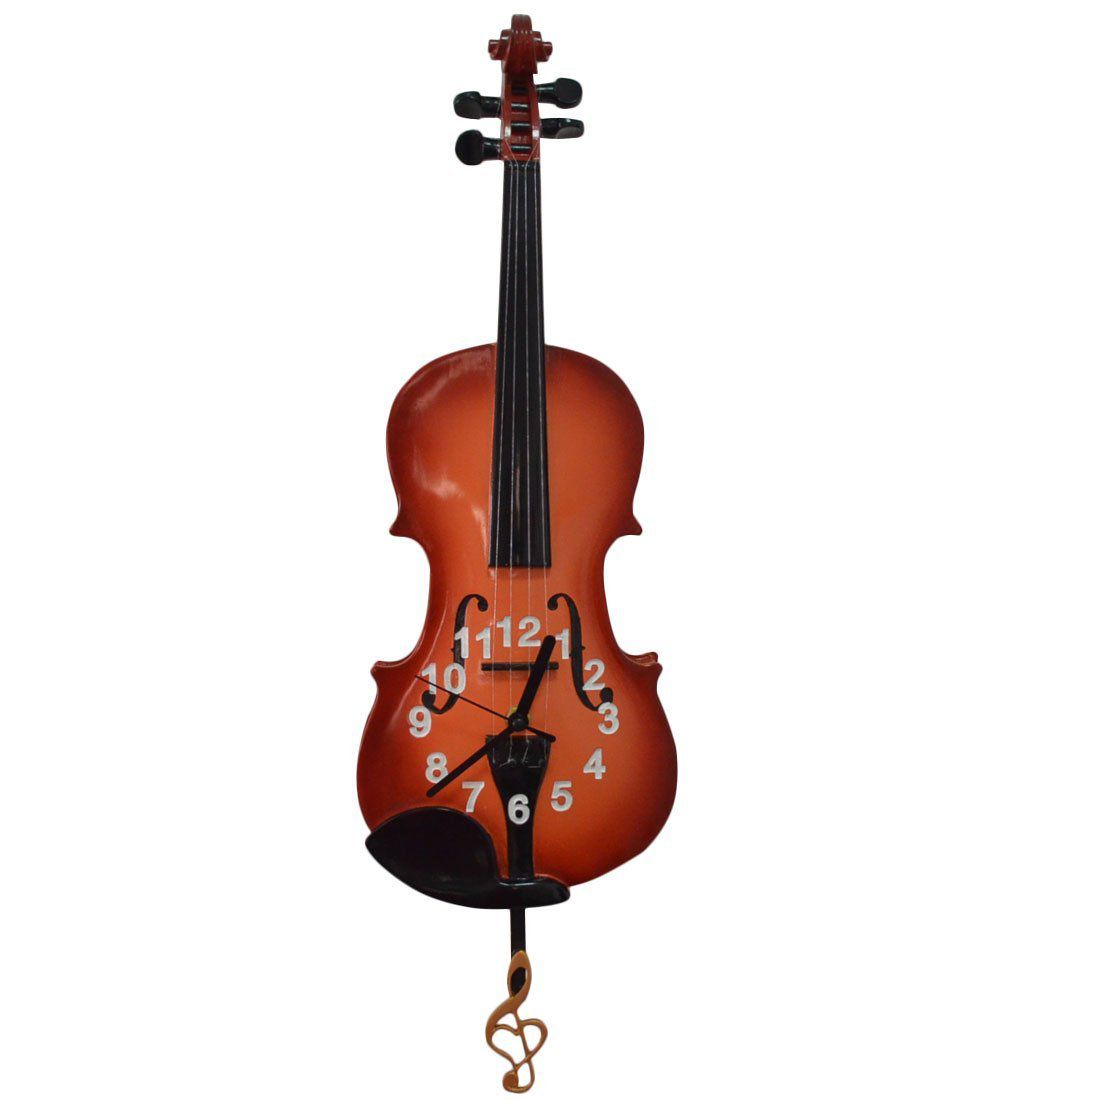 Giftgarden Violin Decor Wall Clocks Musical Gift for Home Decoration